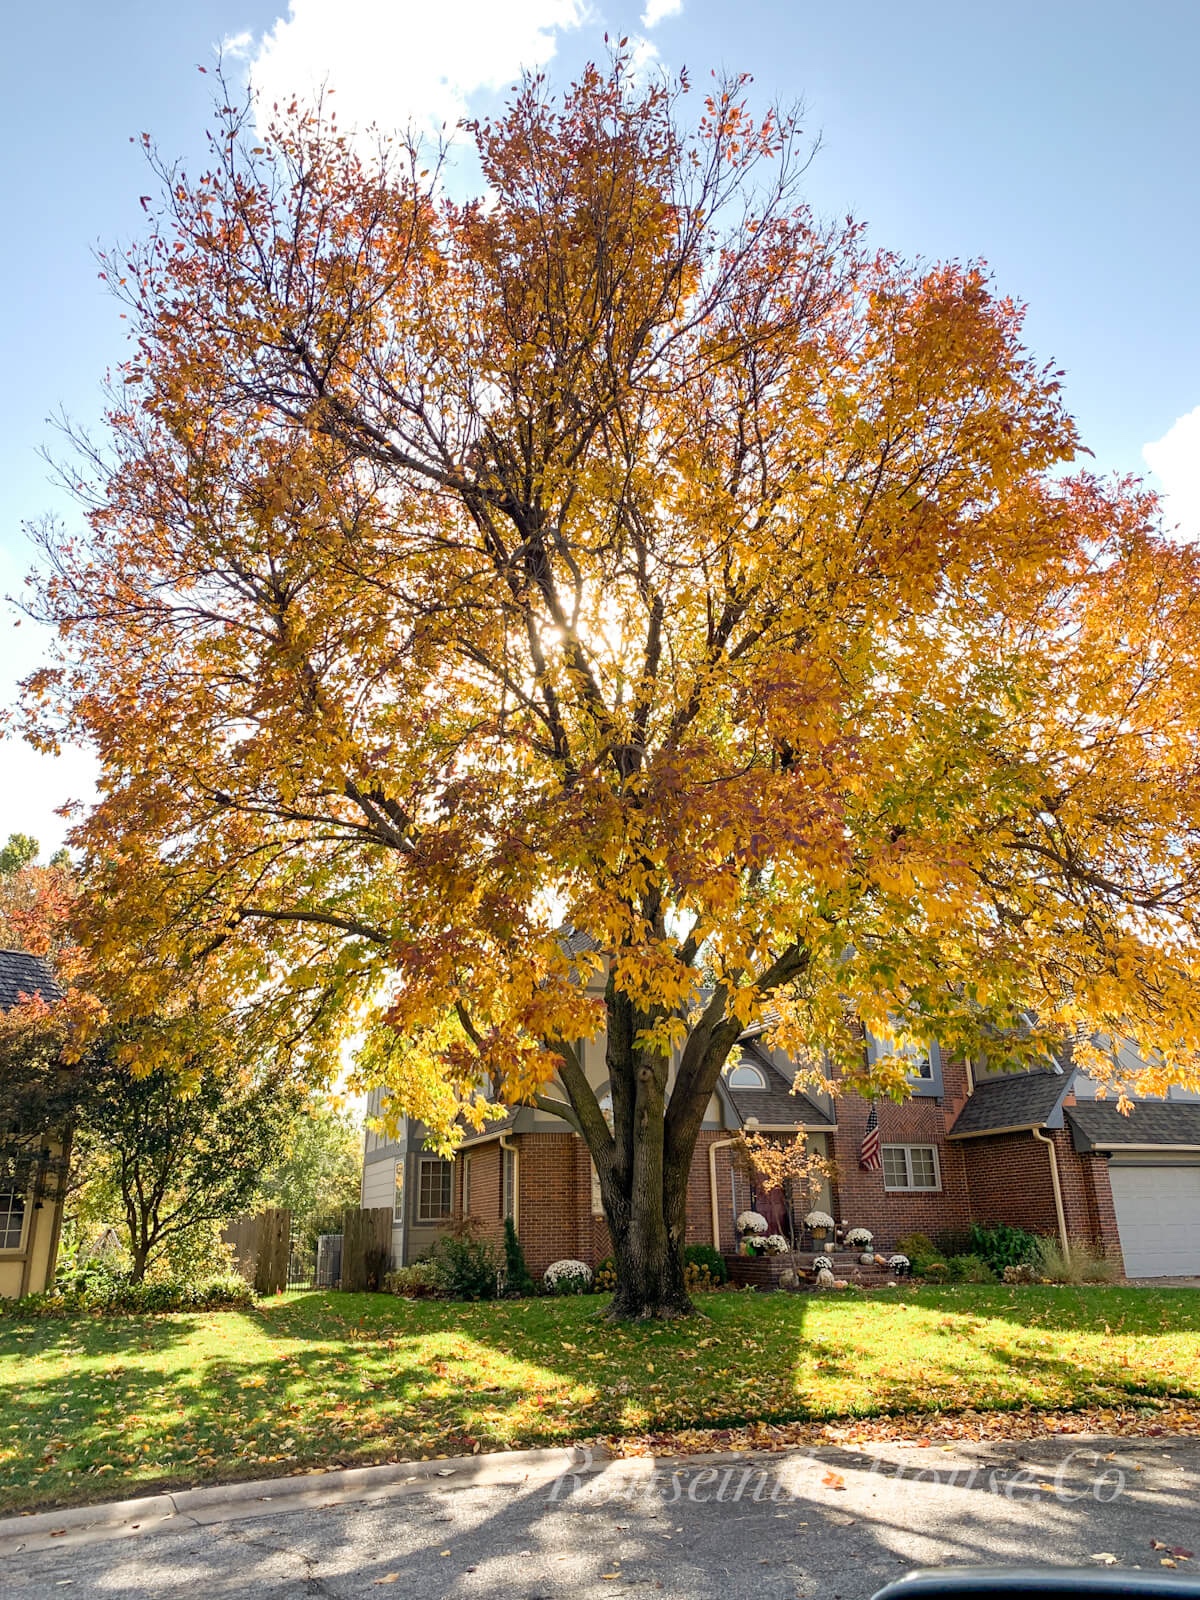 A tall Ash tree with golden foliage lights up a front yard of a Tudor home on a fall day.